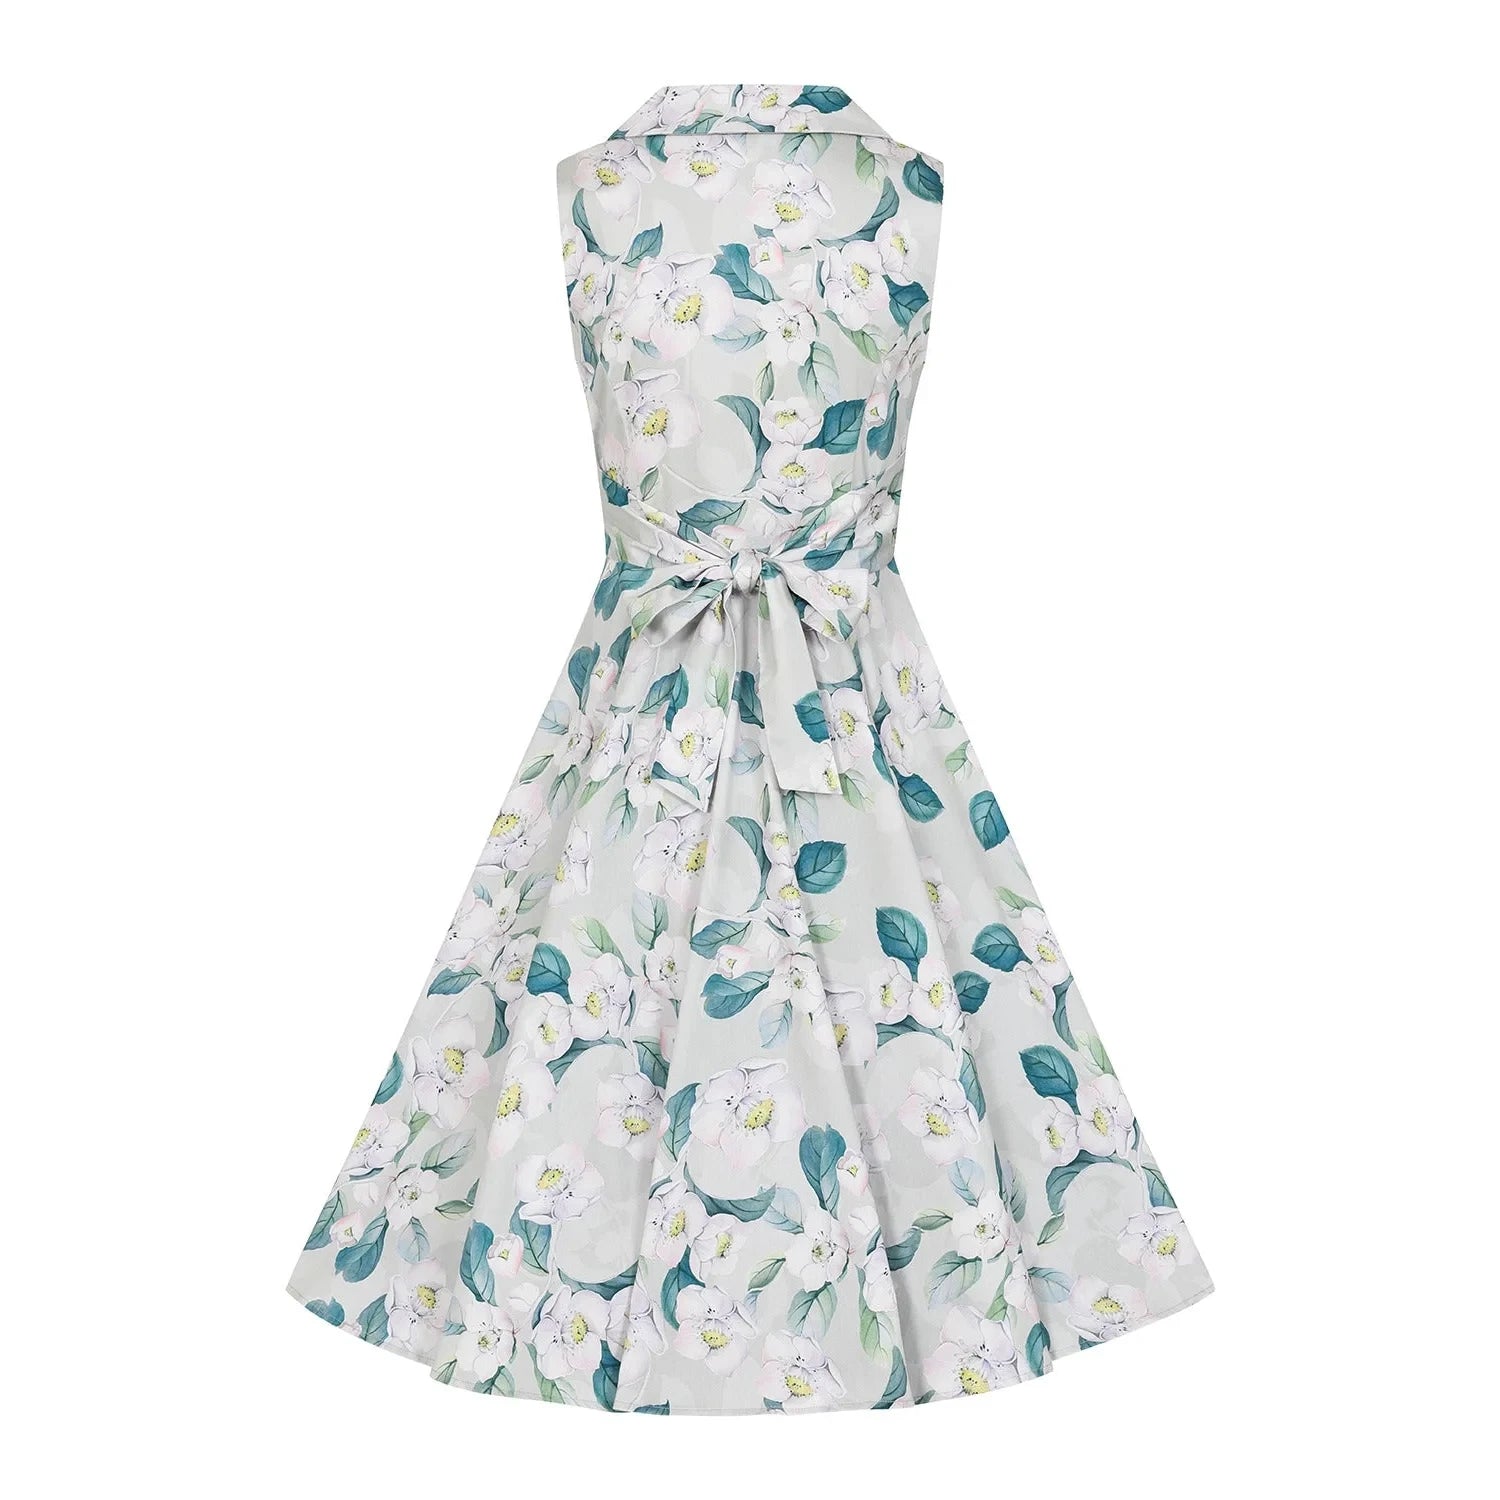 Pale Mint Green & White Floral Collared Sleeveless 50s Swing Tea Dress